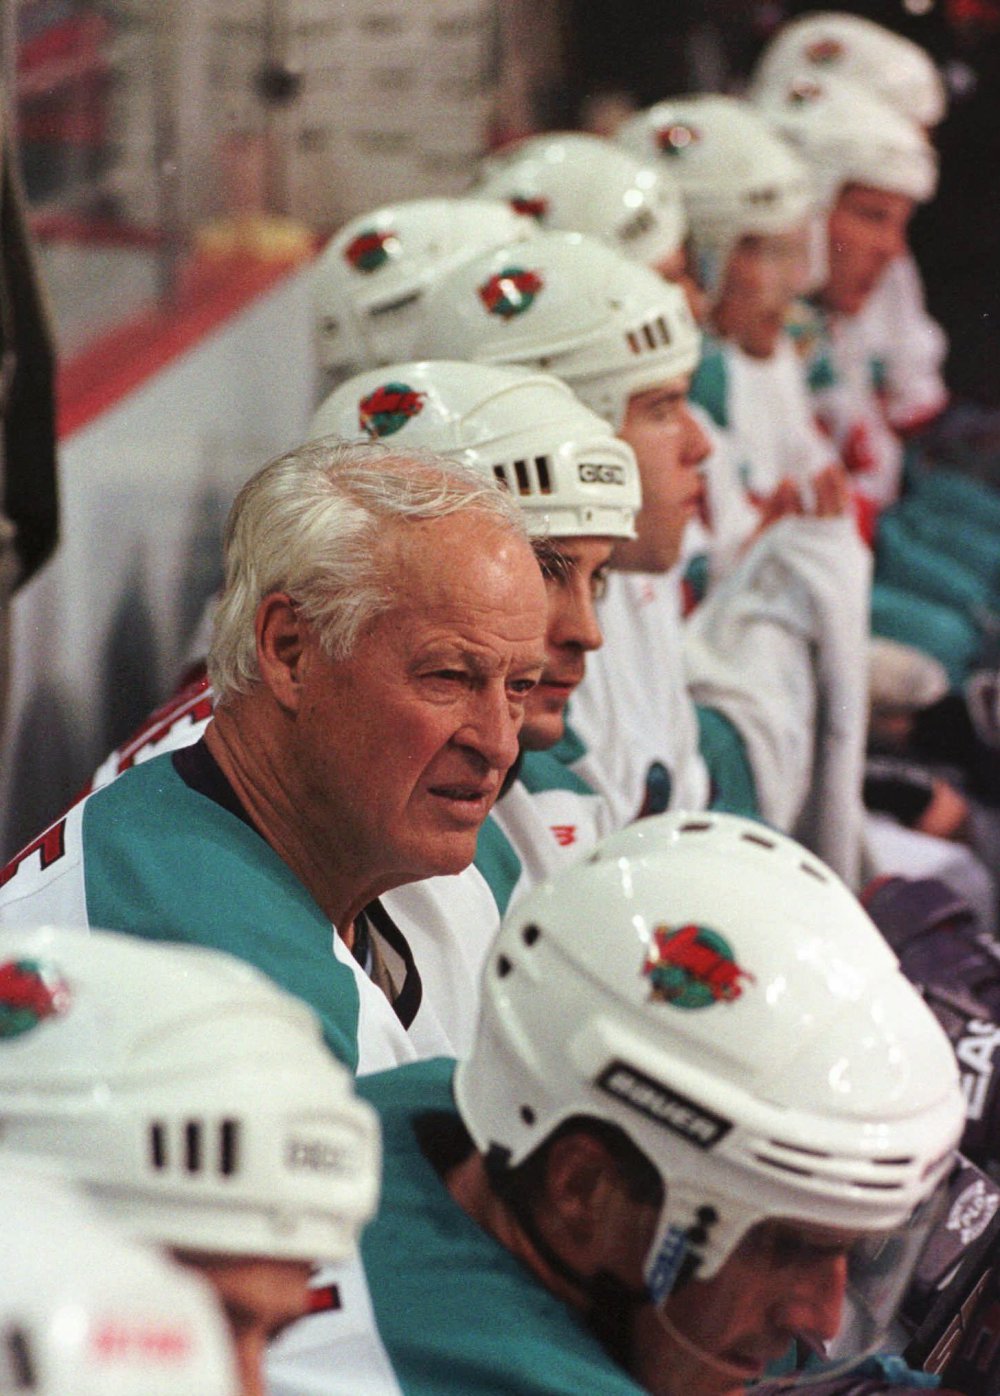 Hedberg: One of the Last to Call Howe “Teammate”